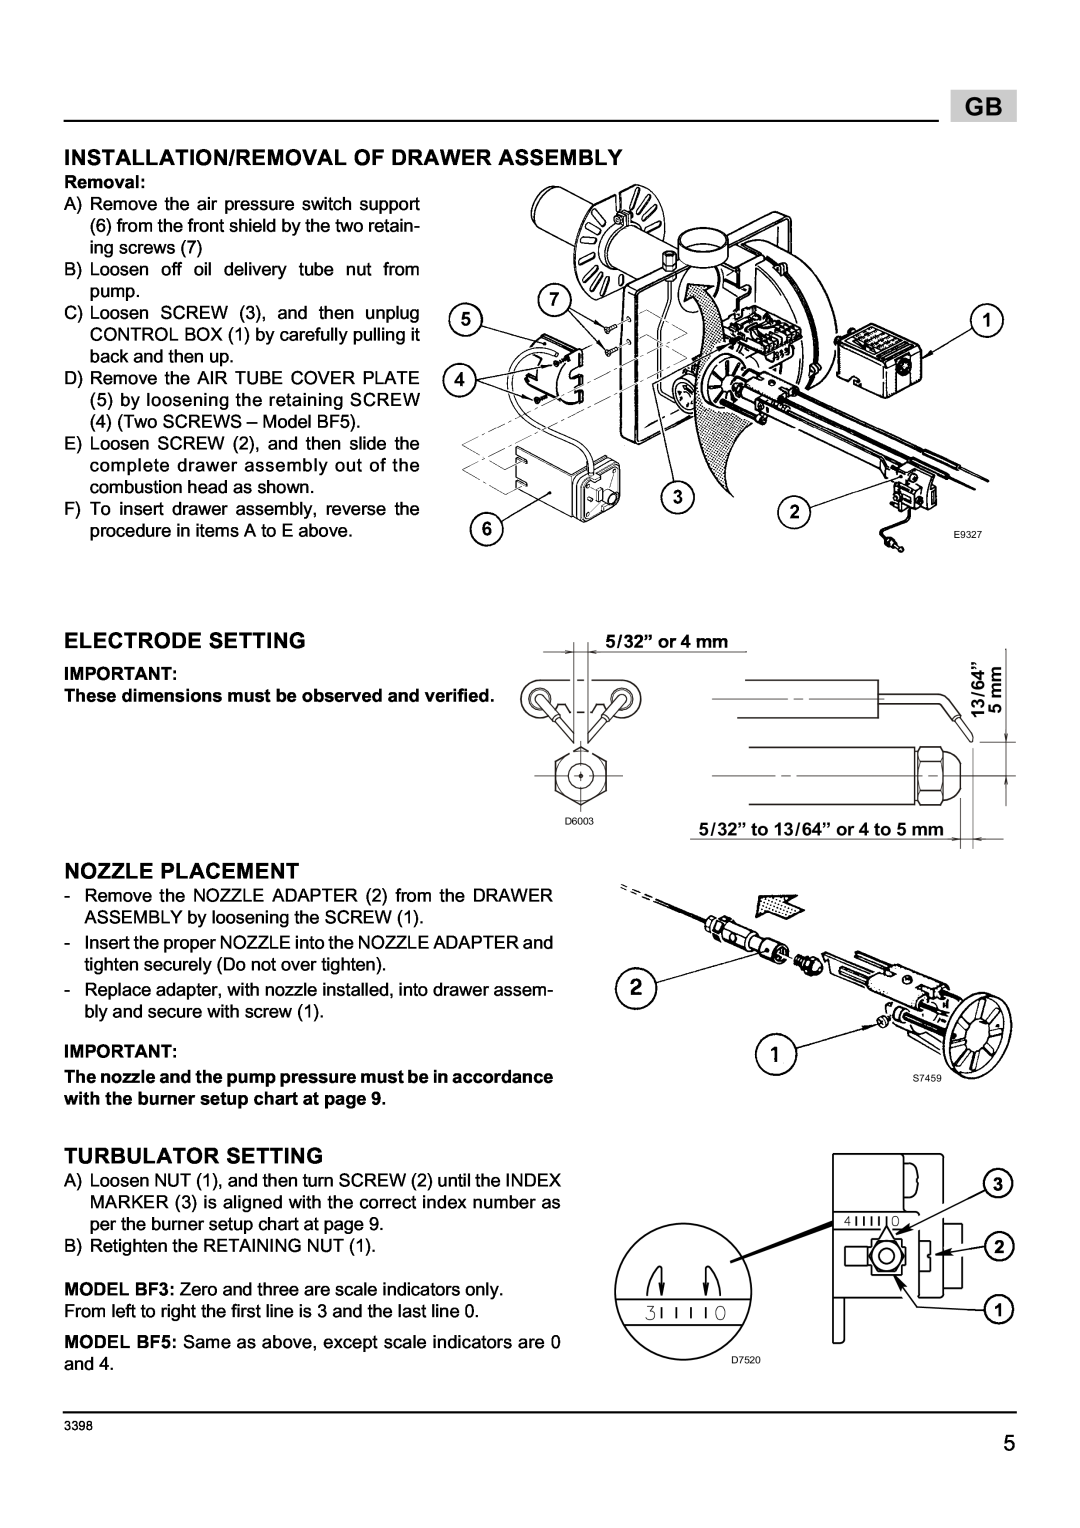 Weil-McLain 800061000-Brn-PO Rie BF5 manual Installation/Removal Of Drawer Assembly, Electrode Setting, Nozzle Placement 